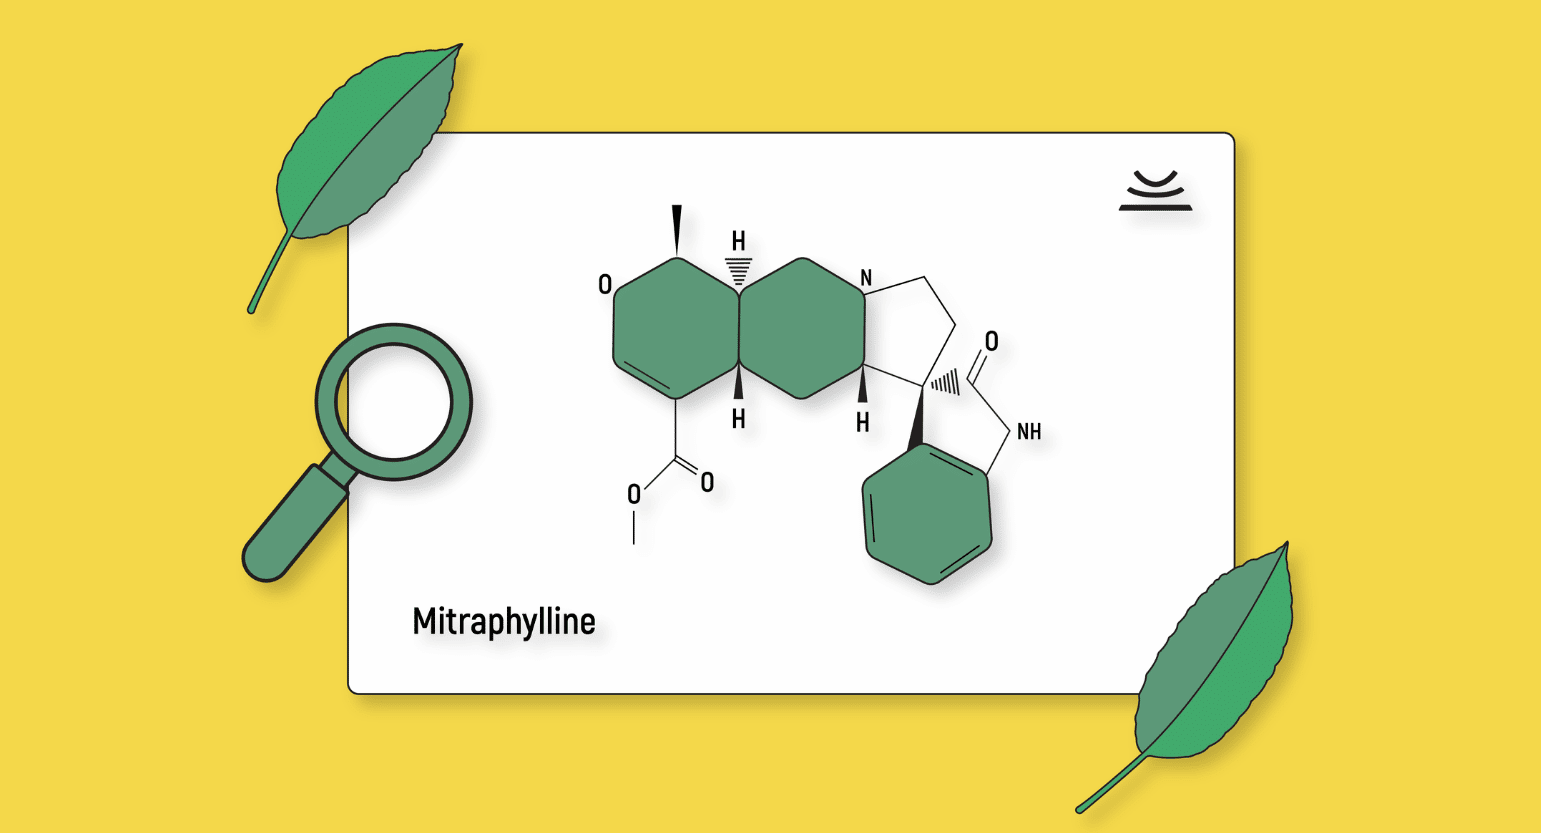 Mitraphylline: A Crucial Kratom Alkaloid With Anti-Inflammatory & Anti-Cancer Properties